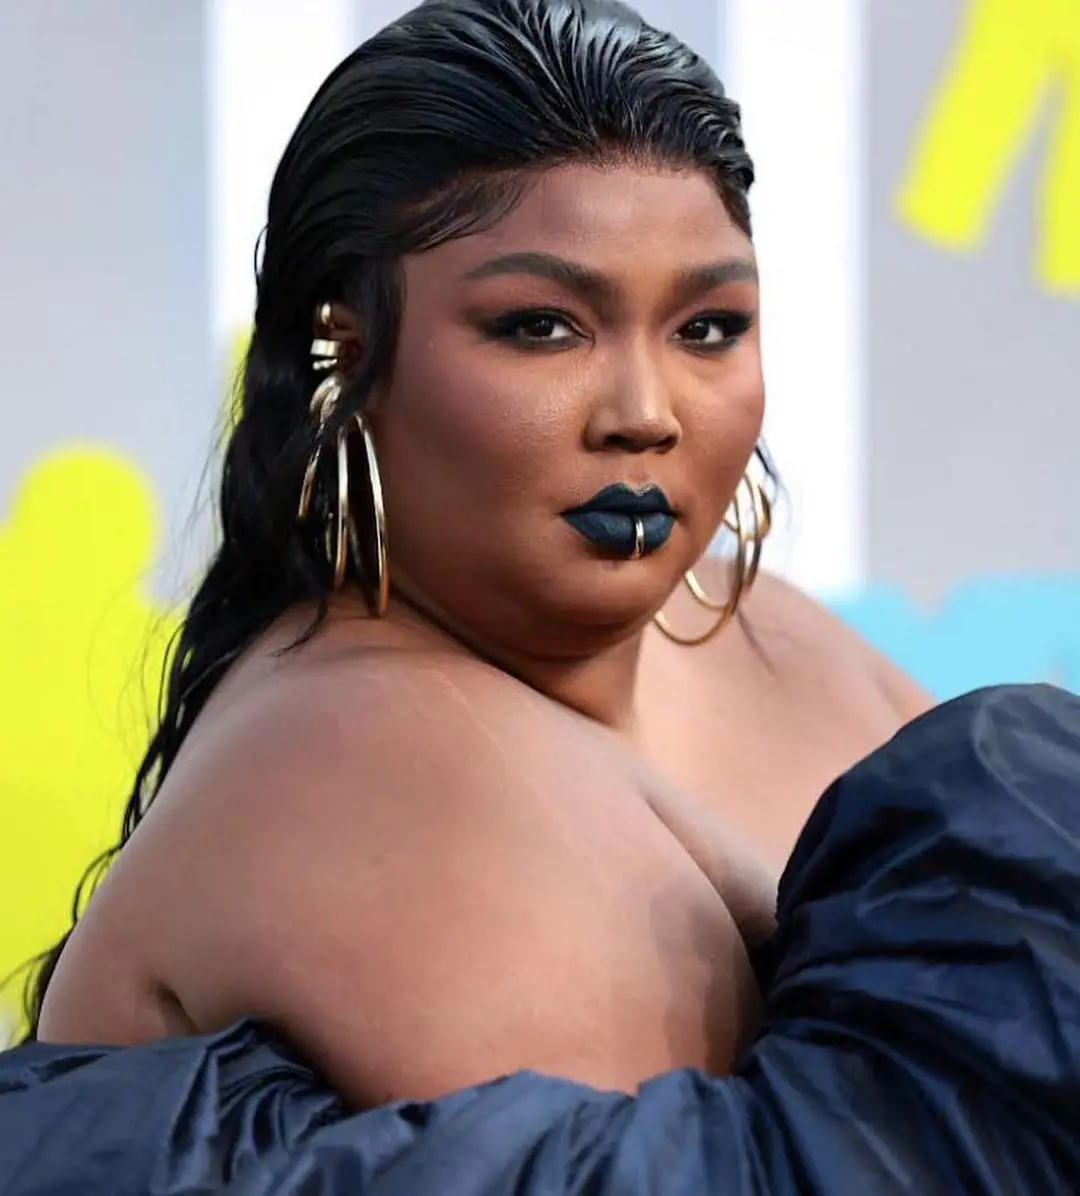 Singer Lizzo popularized the wet hair on natural hair